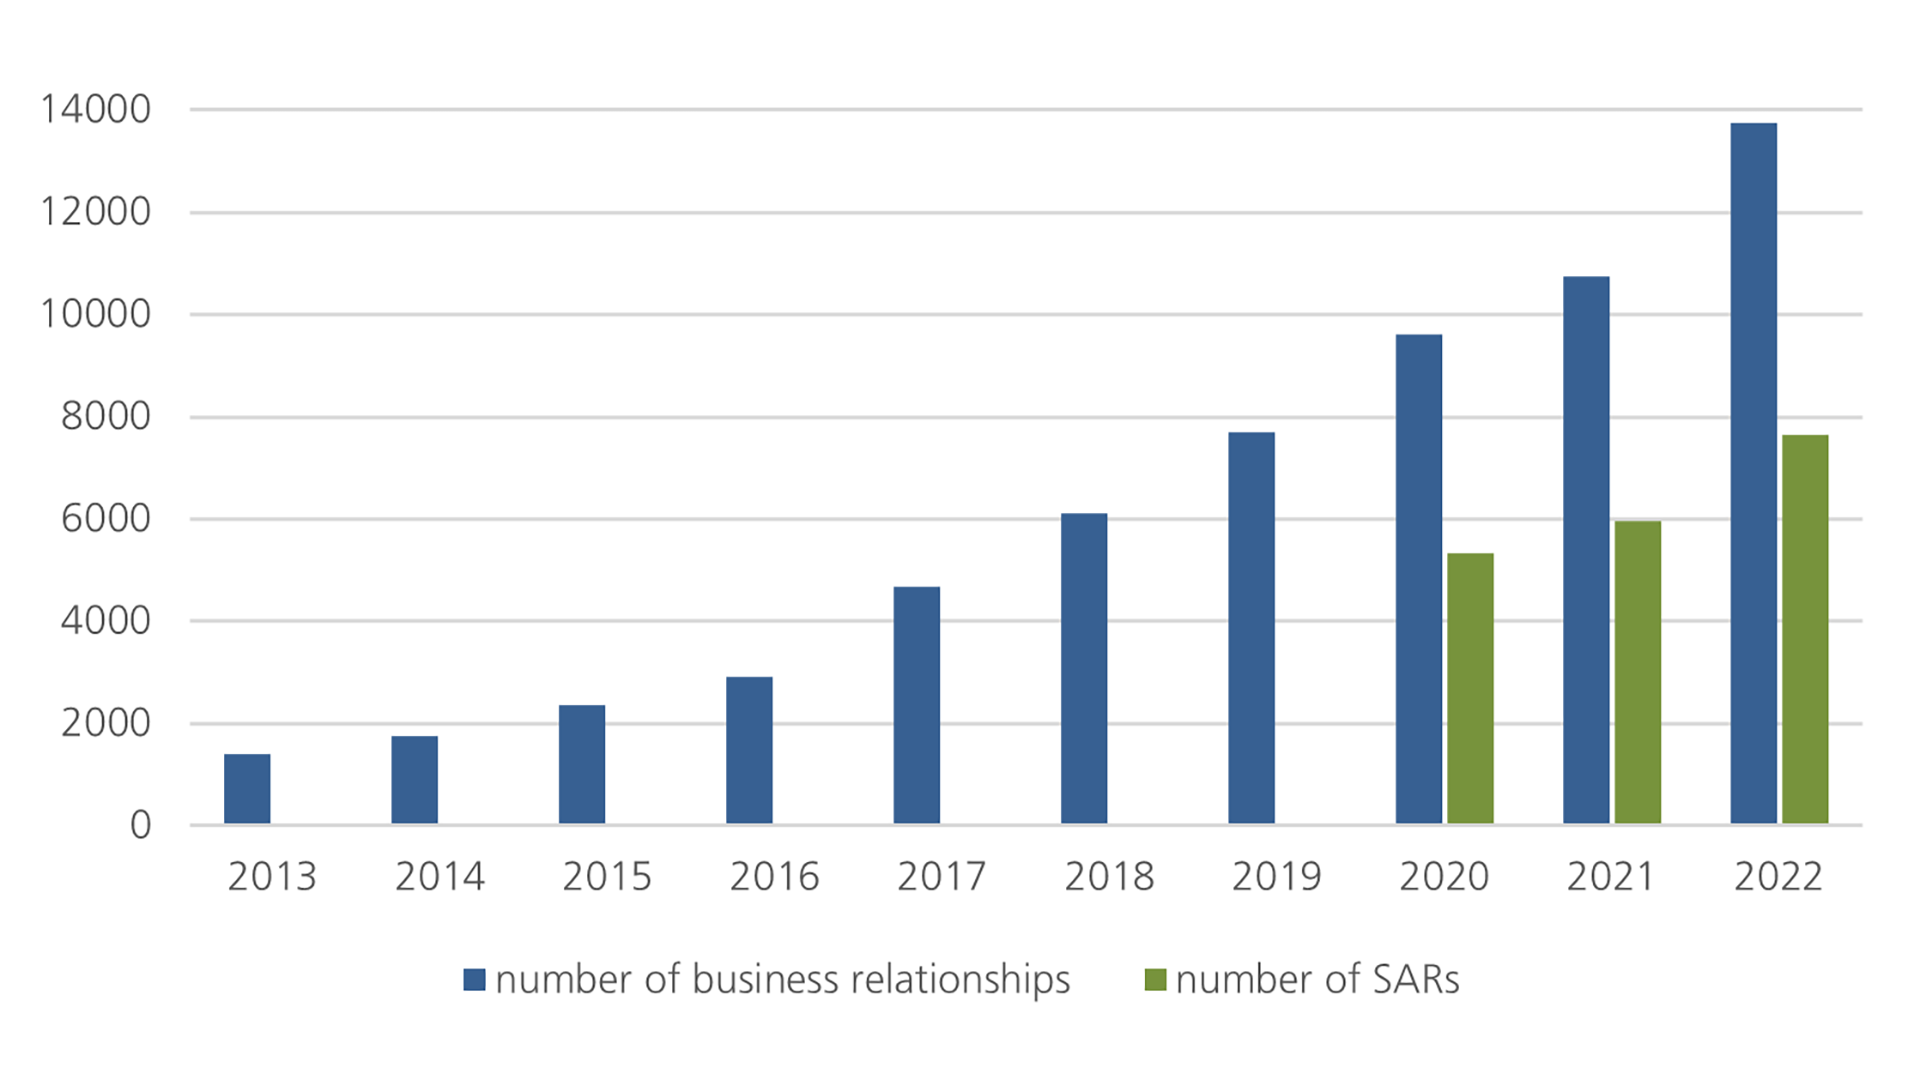 Number of business relationships and Suspicious Activity Re-ports (SARs)